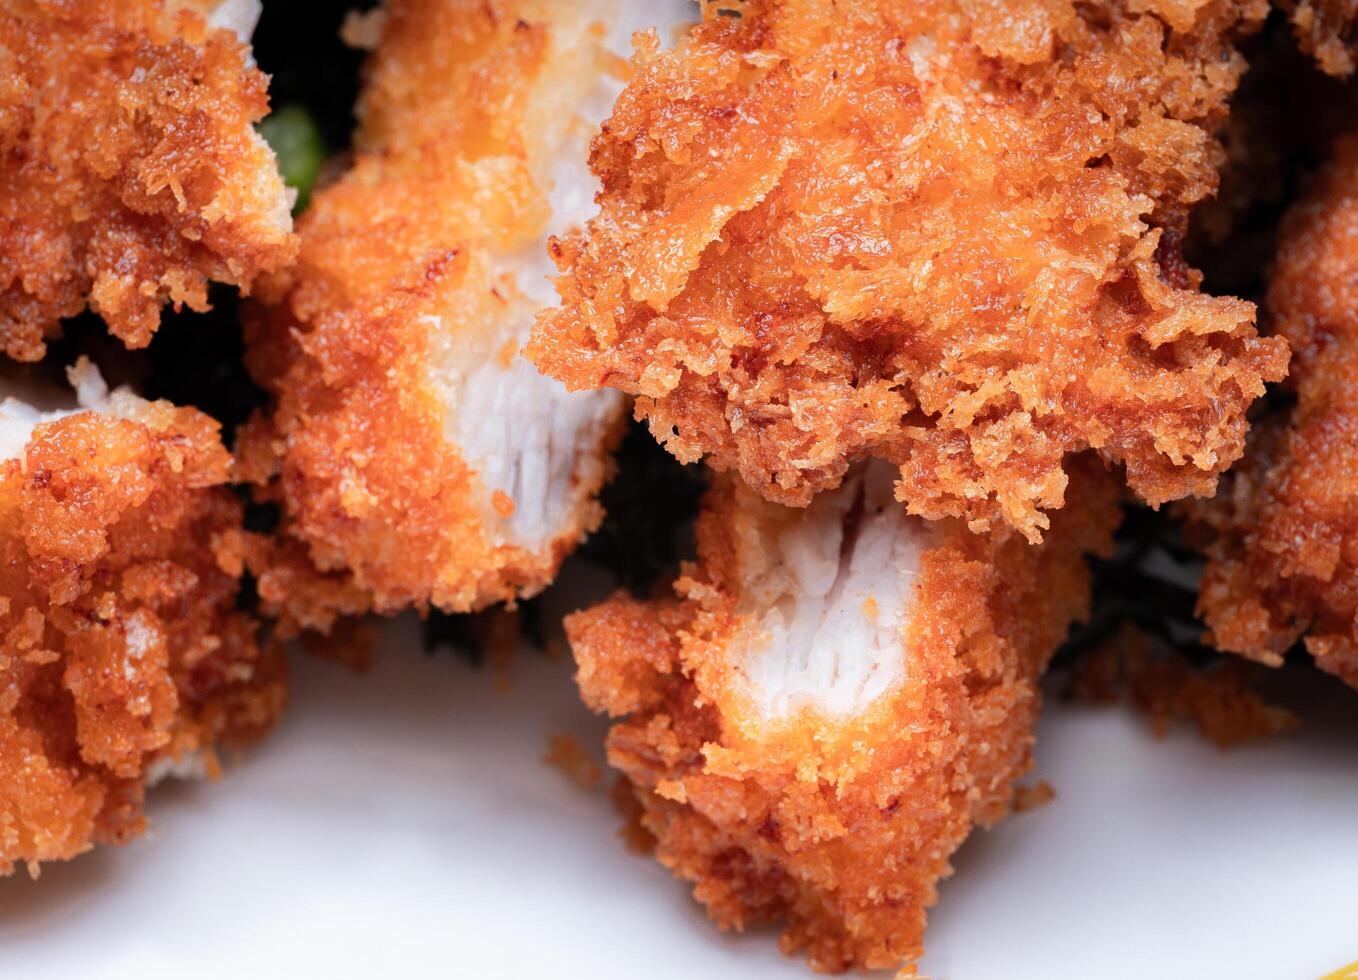 Fried Chicken Ingredients include bread crumbs. One of the most popular fried foods. Chopped or sliced fried chicken placed on a white plate. photo